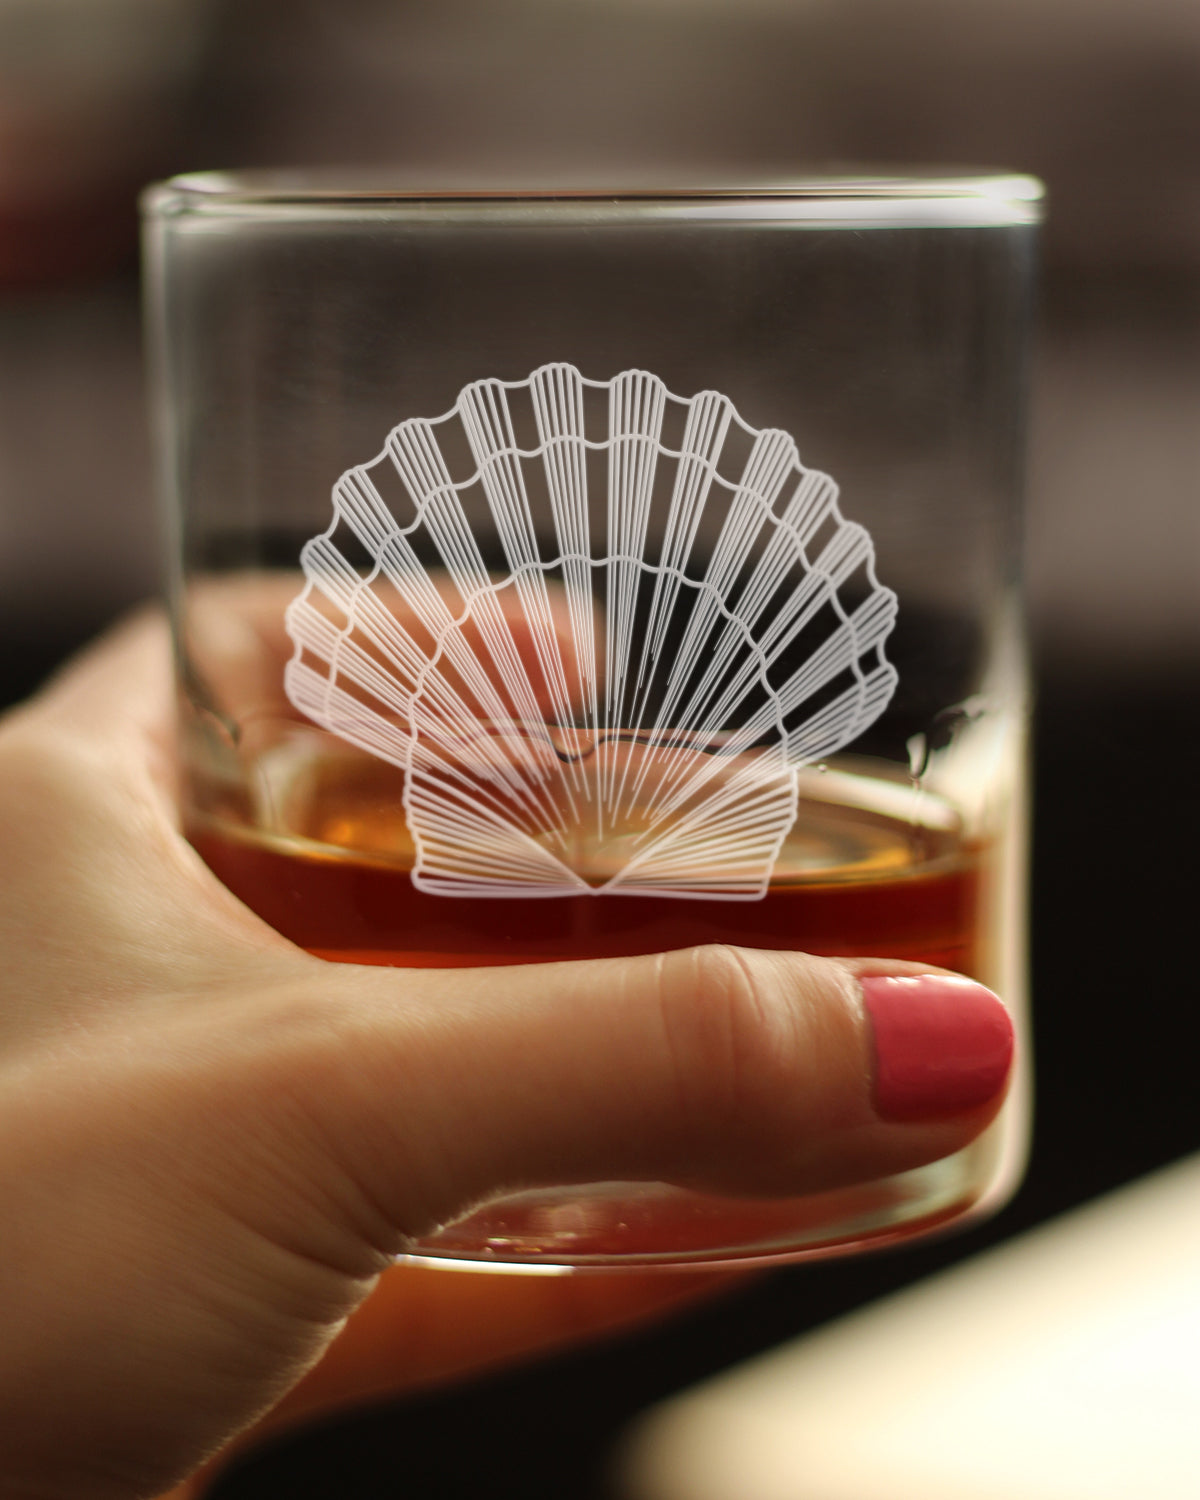 Seashell Engraved Whiskey Rocks Glass, Unique Decorative Gift for Beach House, Nautical Decor Birthday Gifts with Seashells